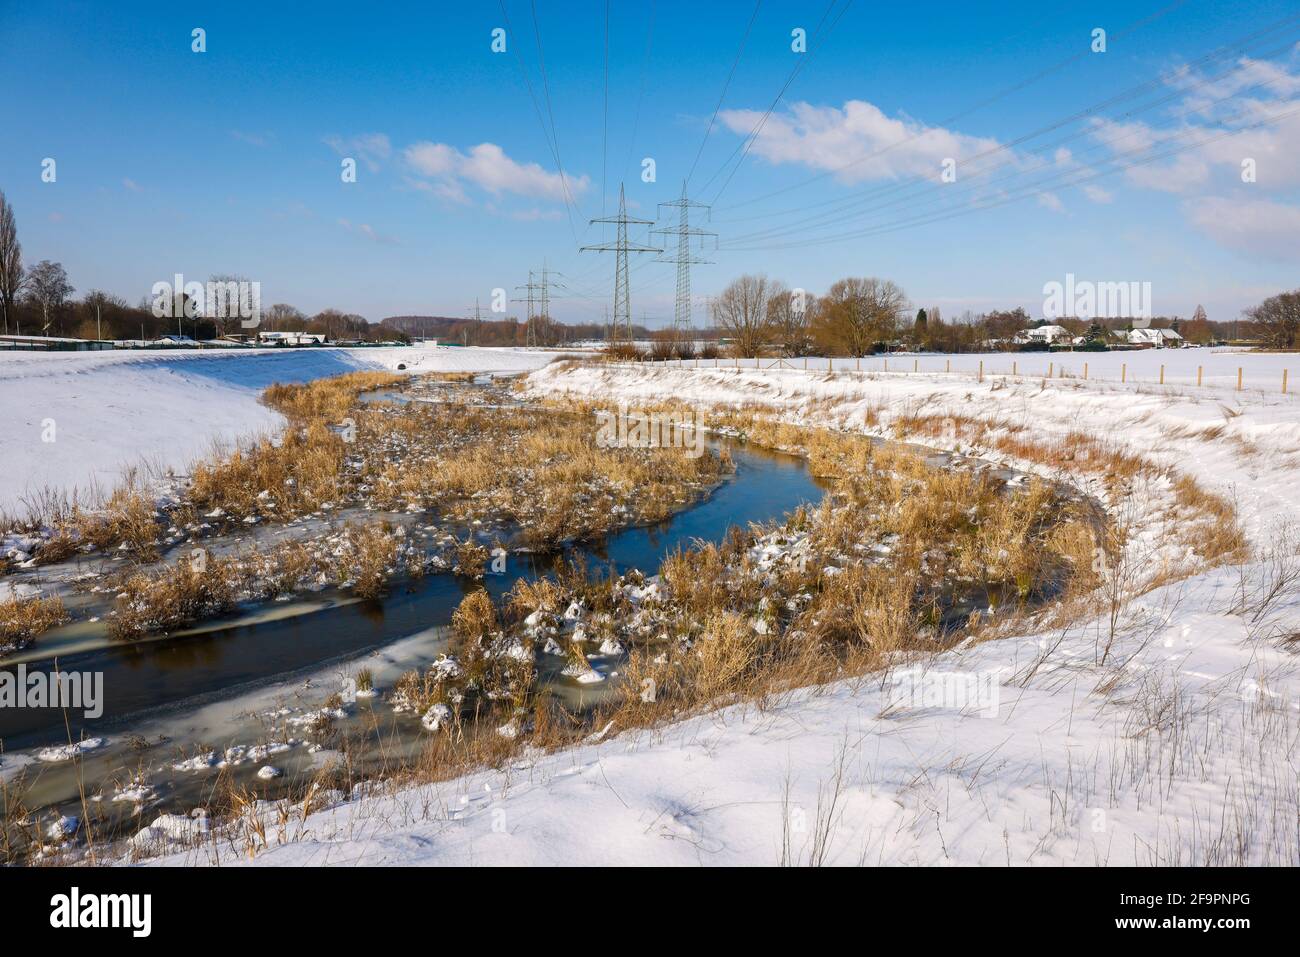 09.02.2021, Bottrop, North Rhine-Westphalia, Germany - Sunny winter landscape in the Ruhr area, ice and snow on the renaturalized Boye, the small rive Stock Photo